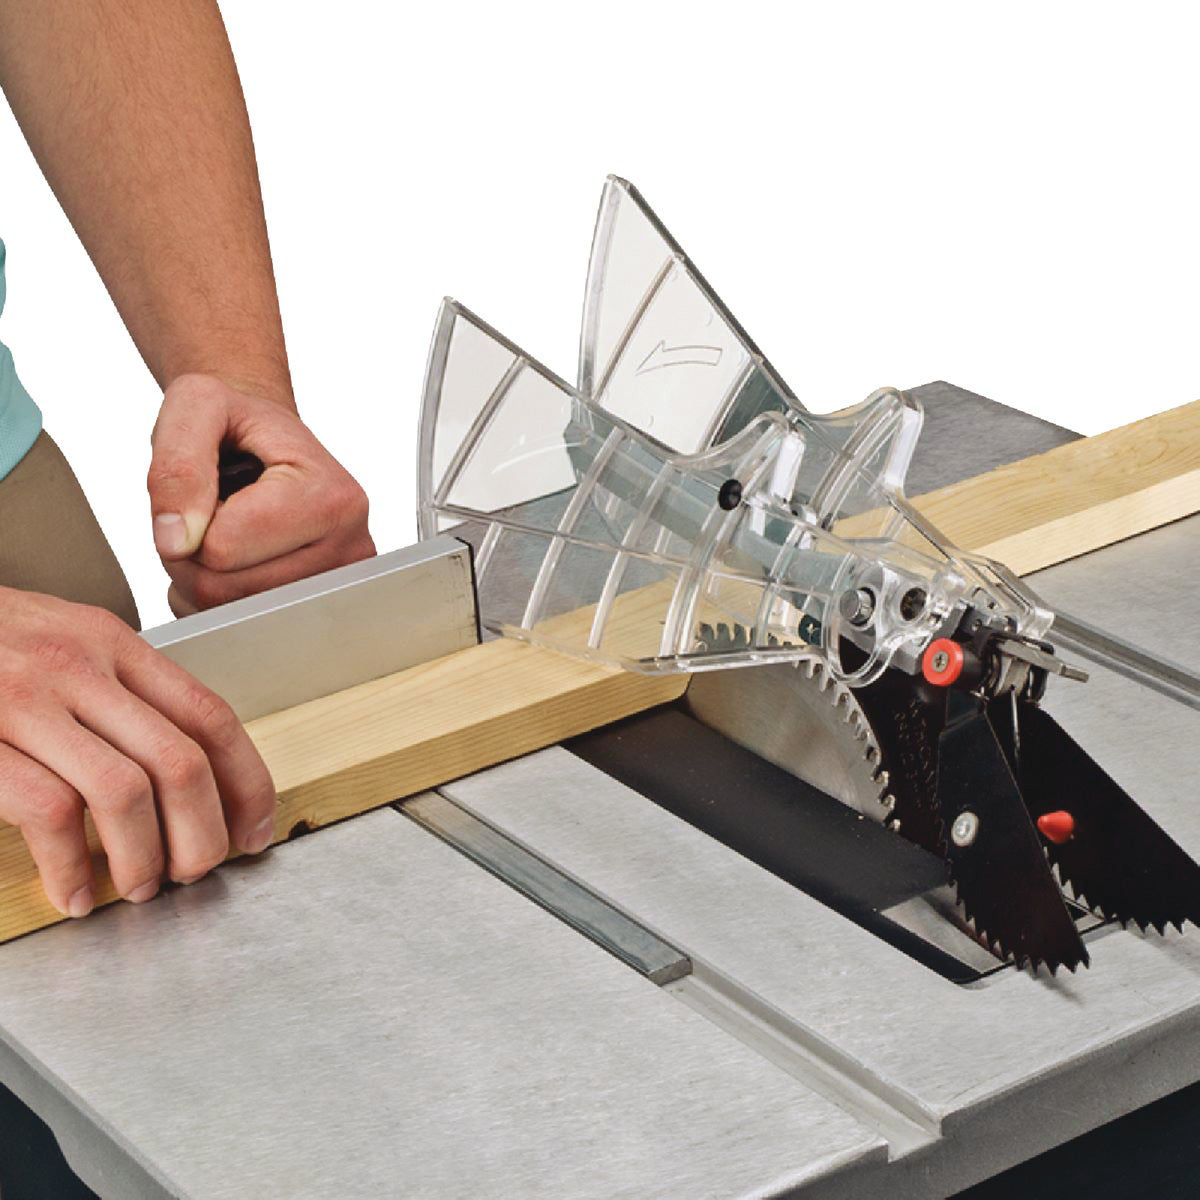 Genesis 15-Amp 10 In. Table Saw with Stand Do it Best